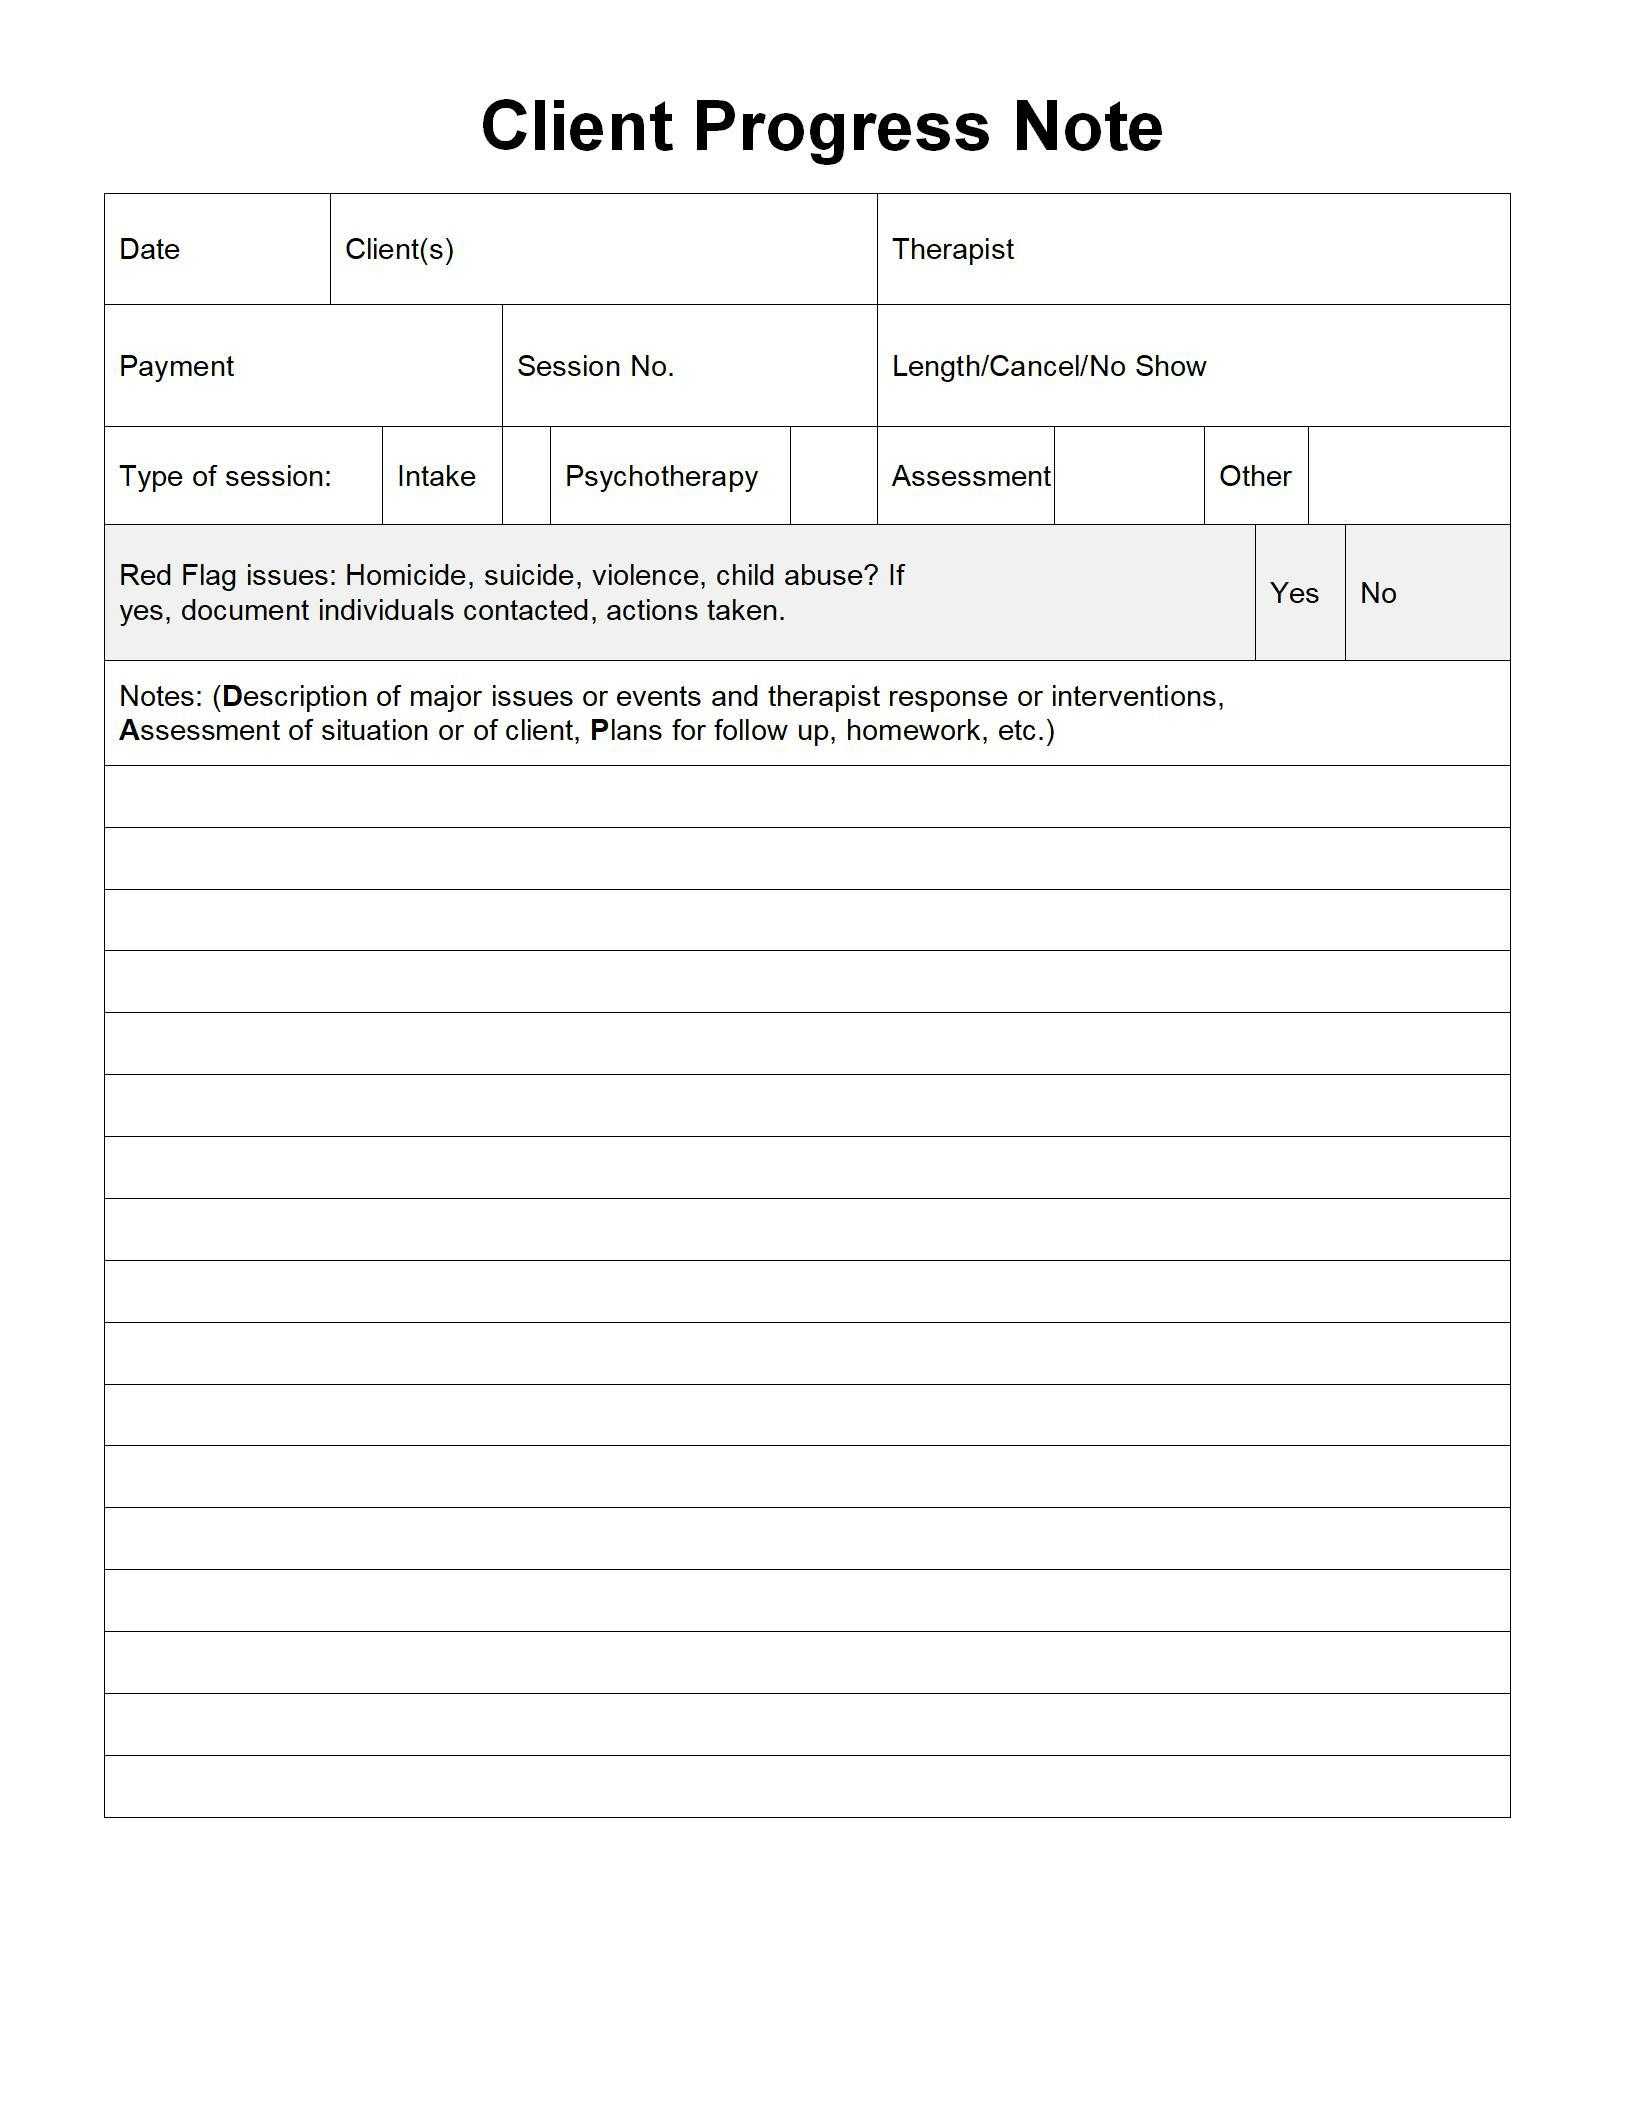 Wps Template – Free Download Writer, Presentation With Soap Note Template Word